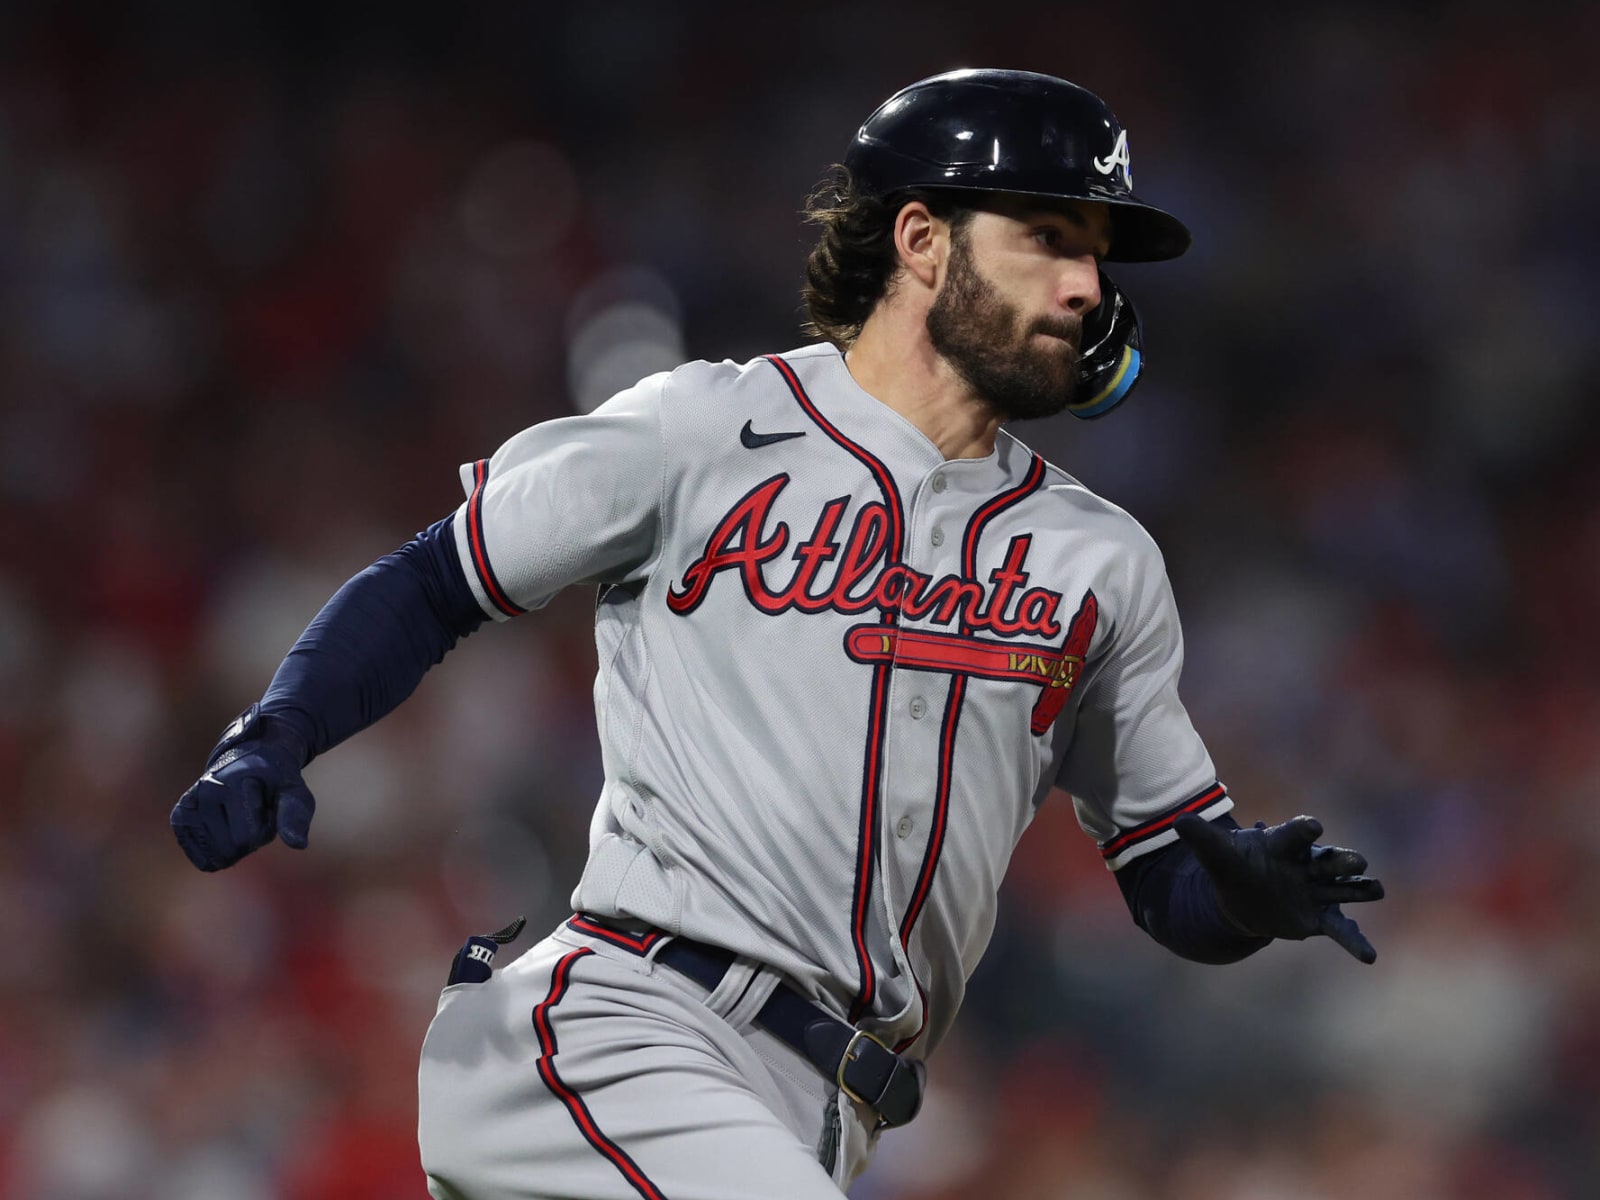 Braves' offseason questions include SS Dansby Swanson